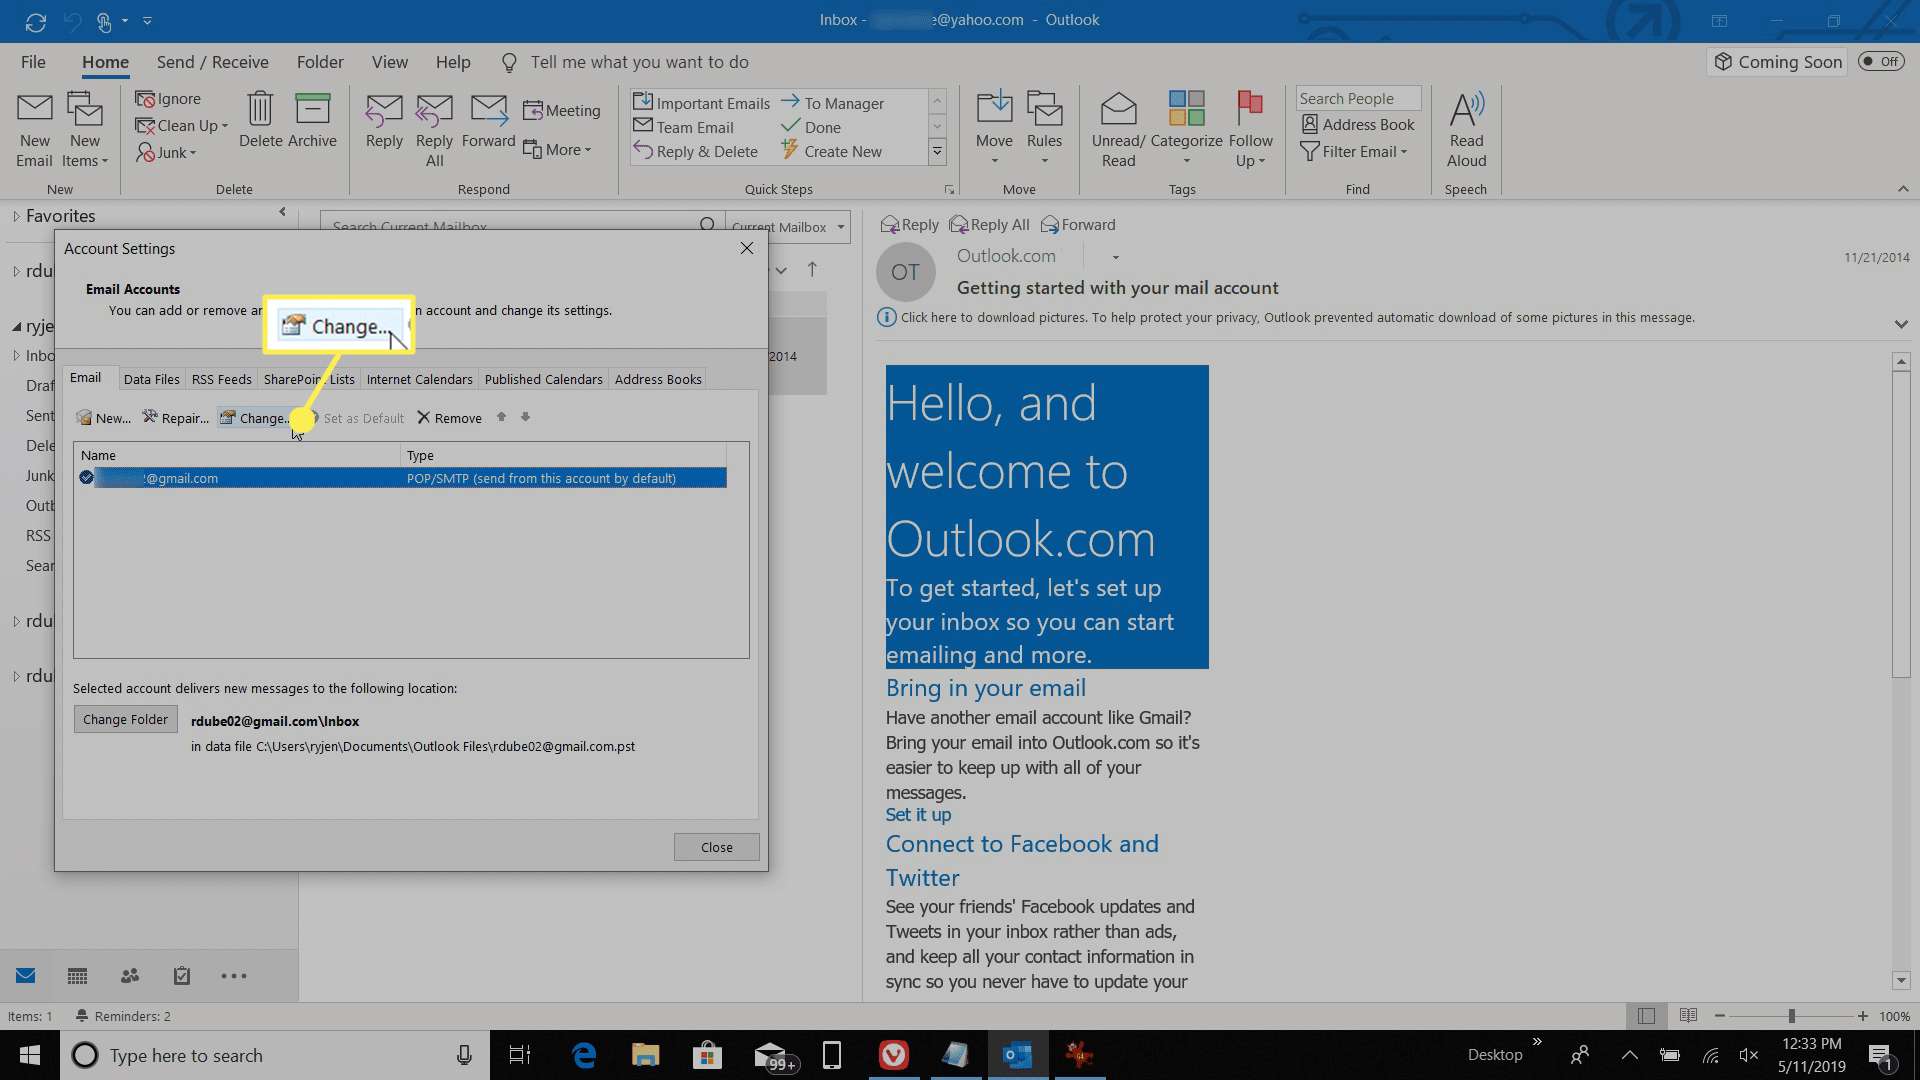 changing the from address in a new email in outlook 2016 for mac